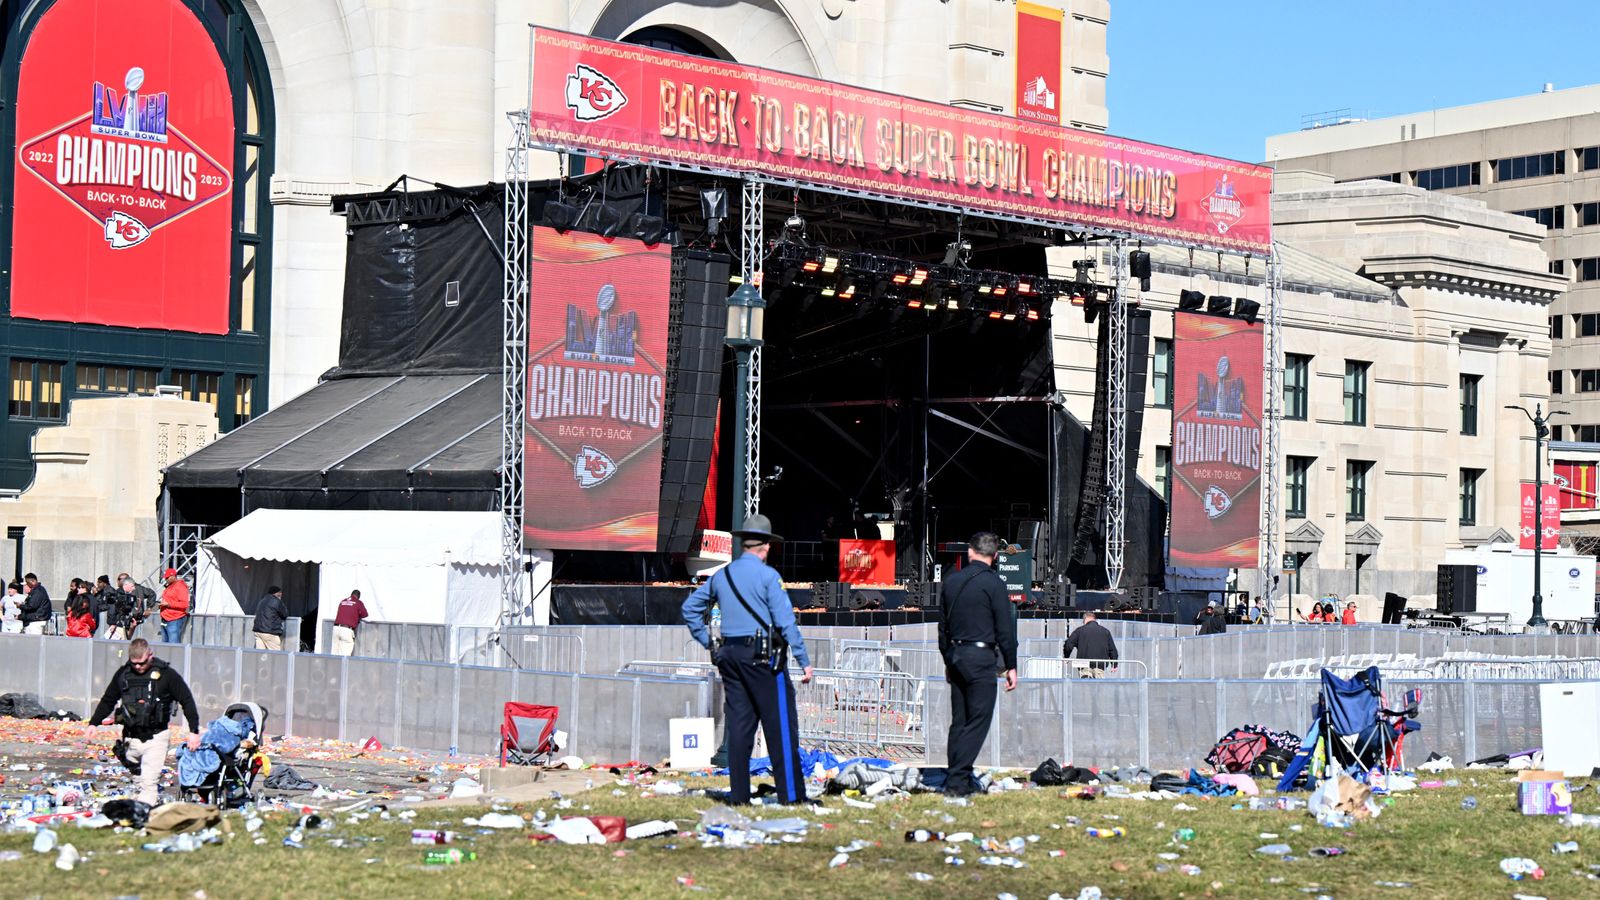 Two men charged with murder over shooting at Kansas City Chiefs' Super Bowl celebrations